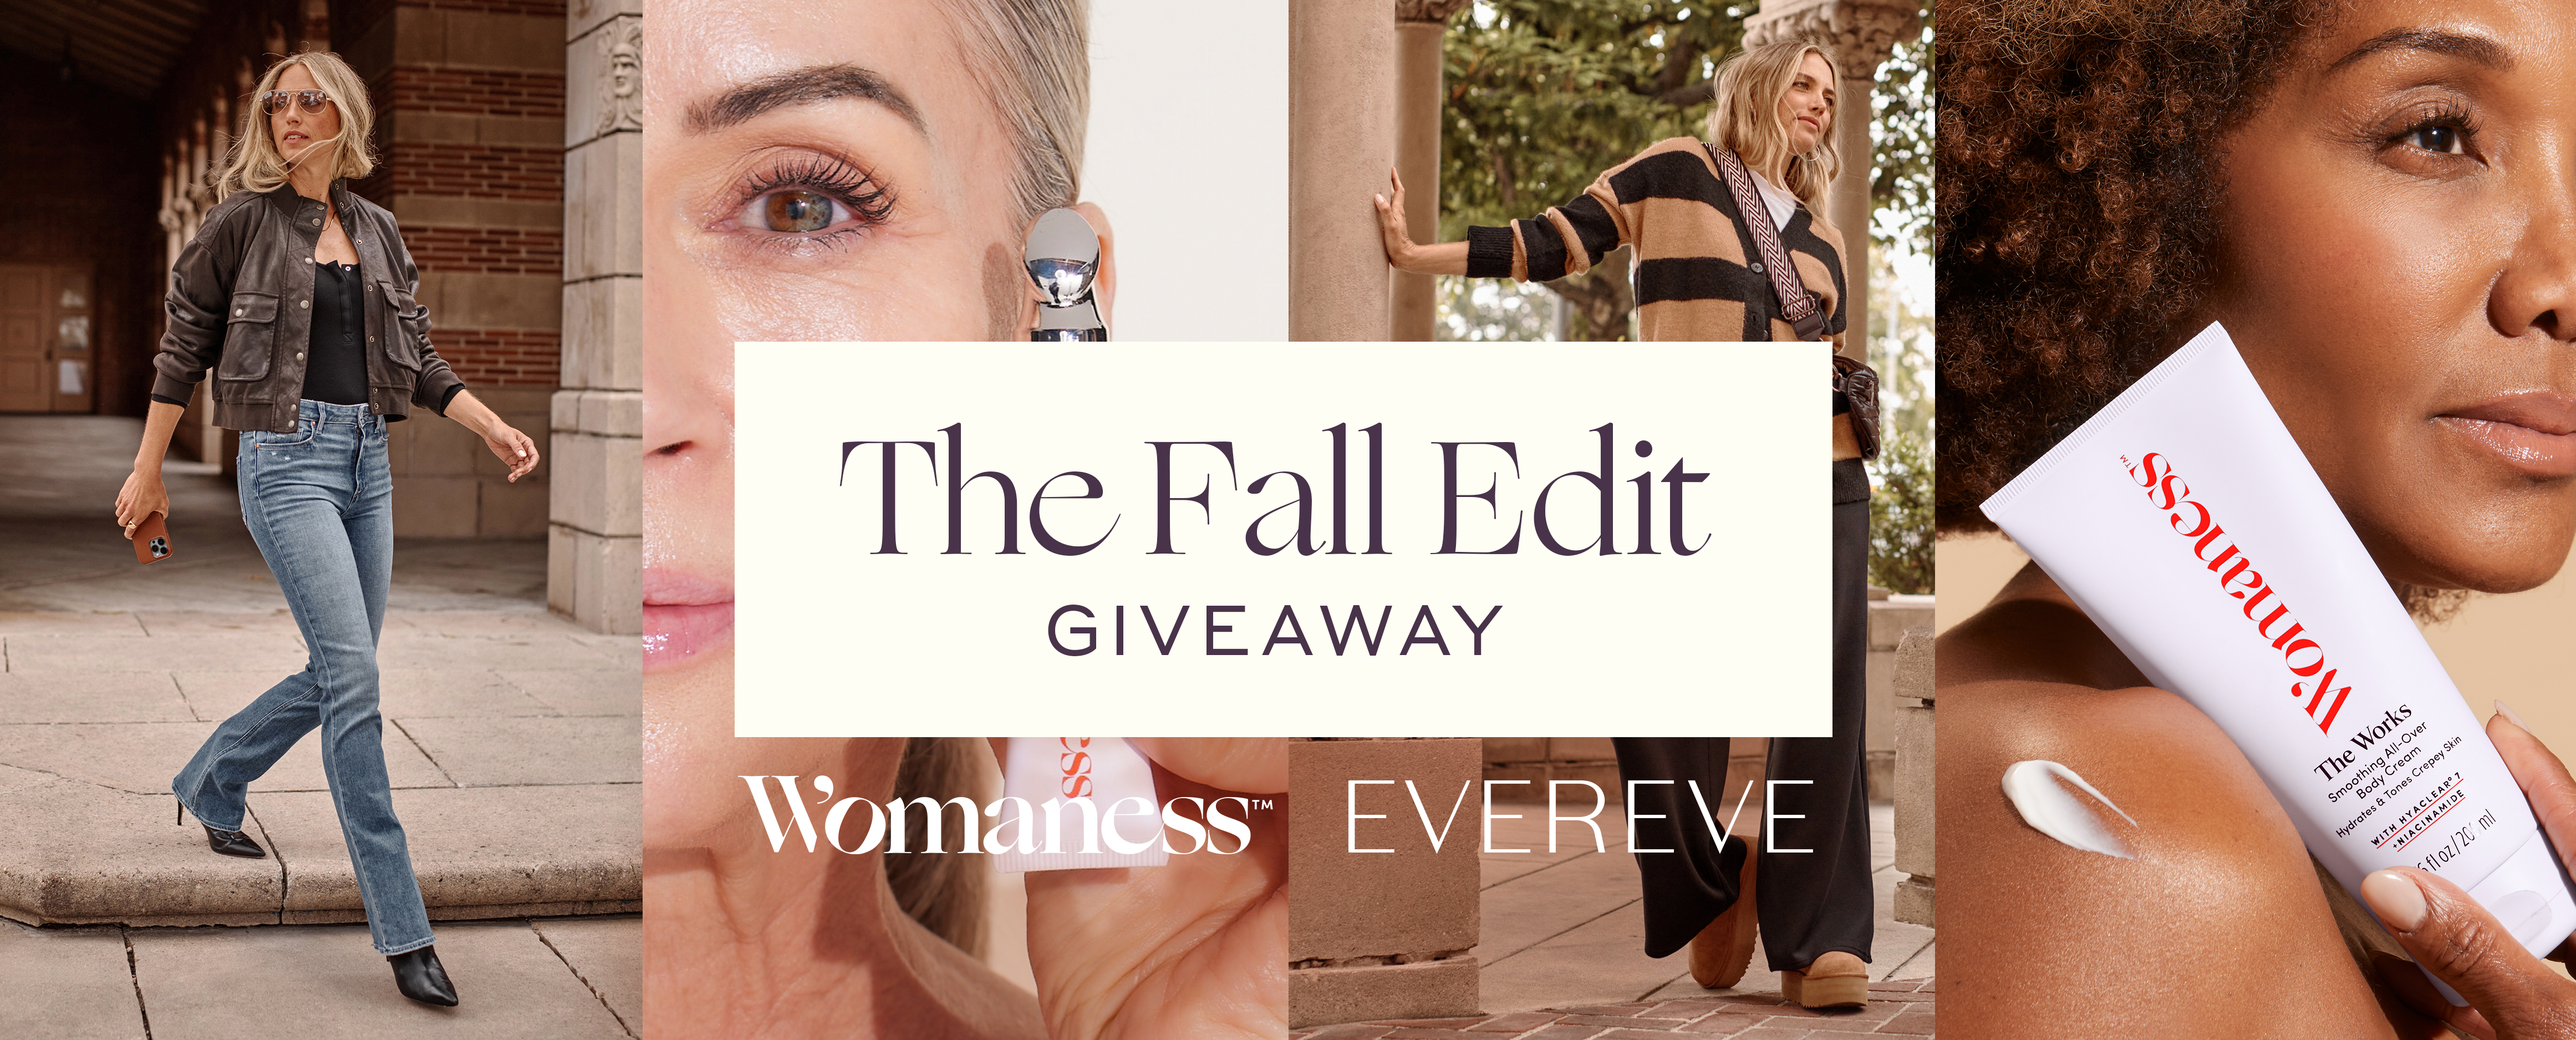 Evereve x Womaness Giveaway